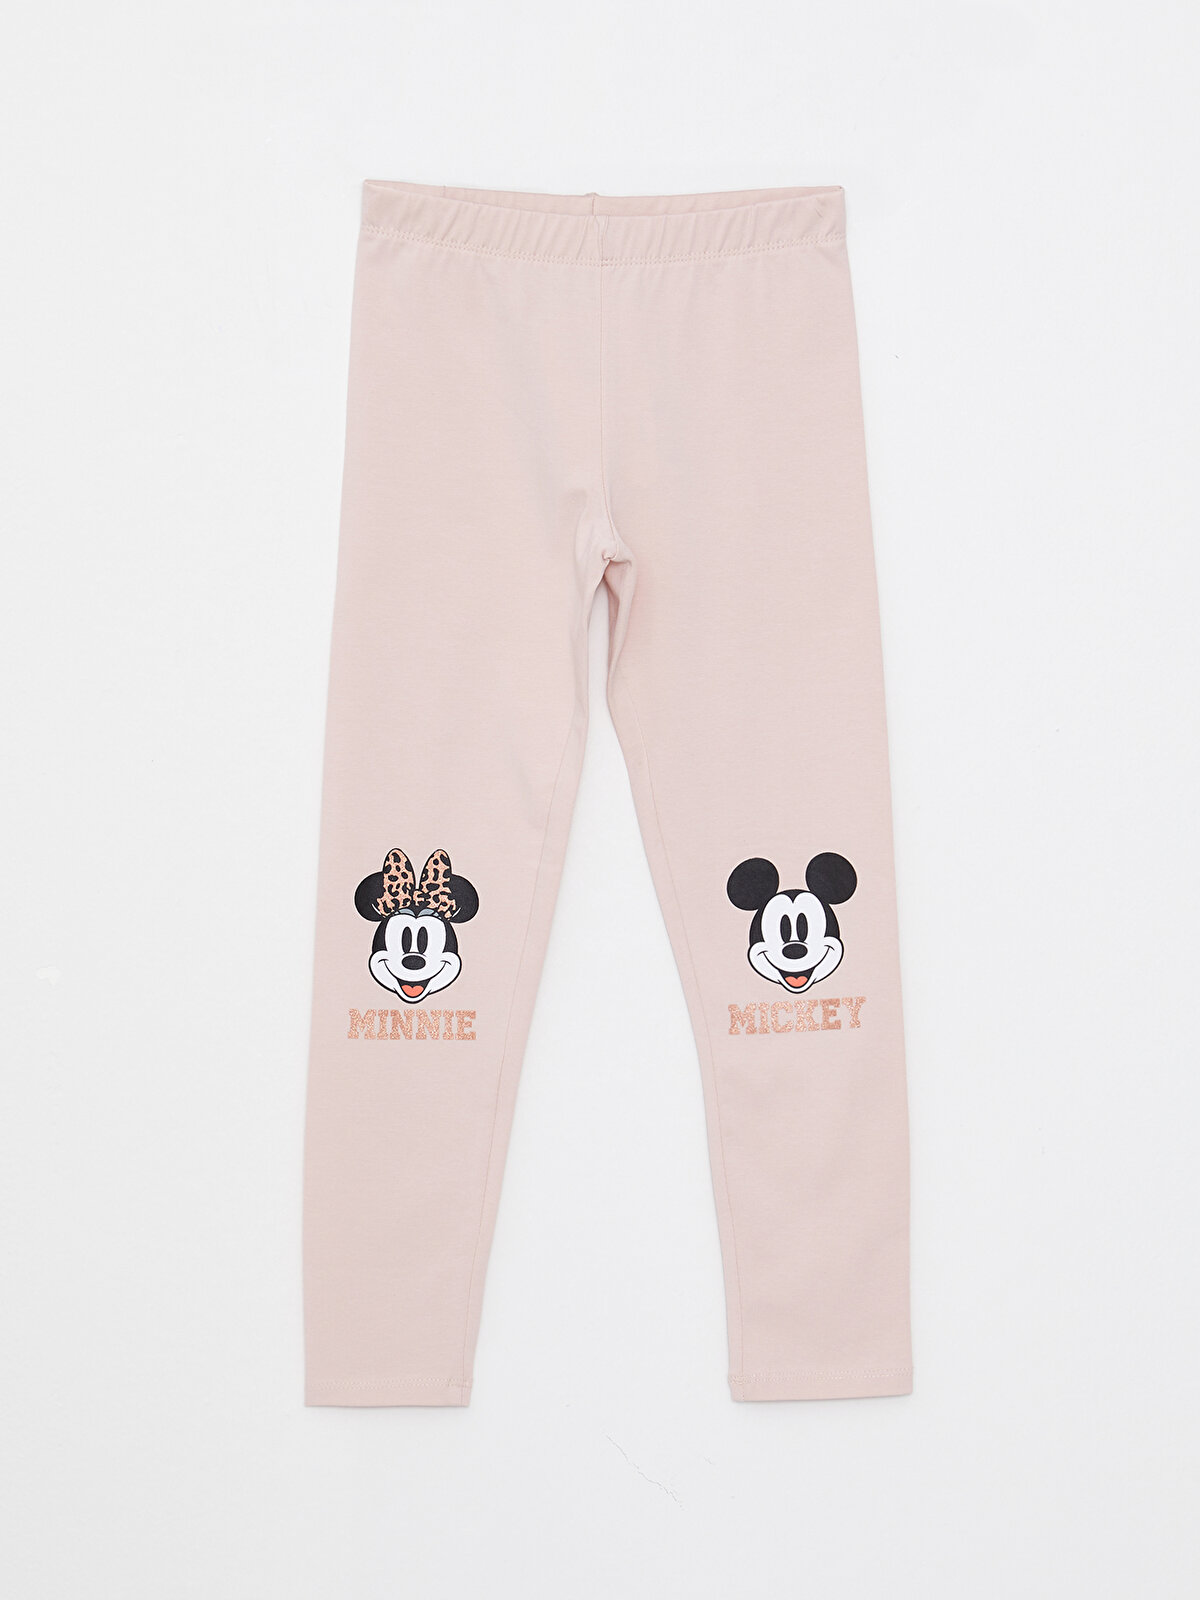 Elastic Waist Minnie and Mickey Mouse Printed Cotton Girls' Tights